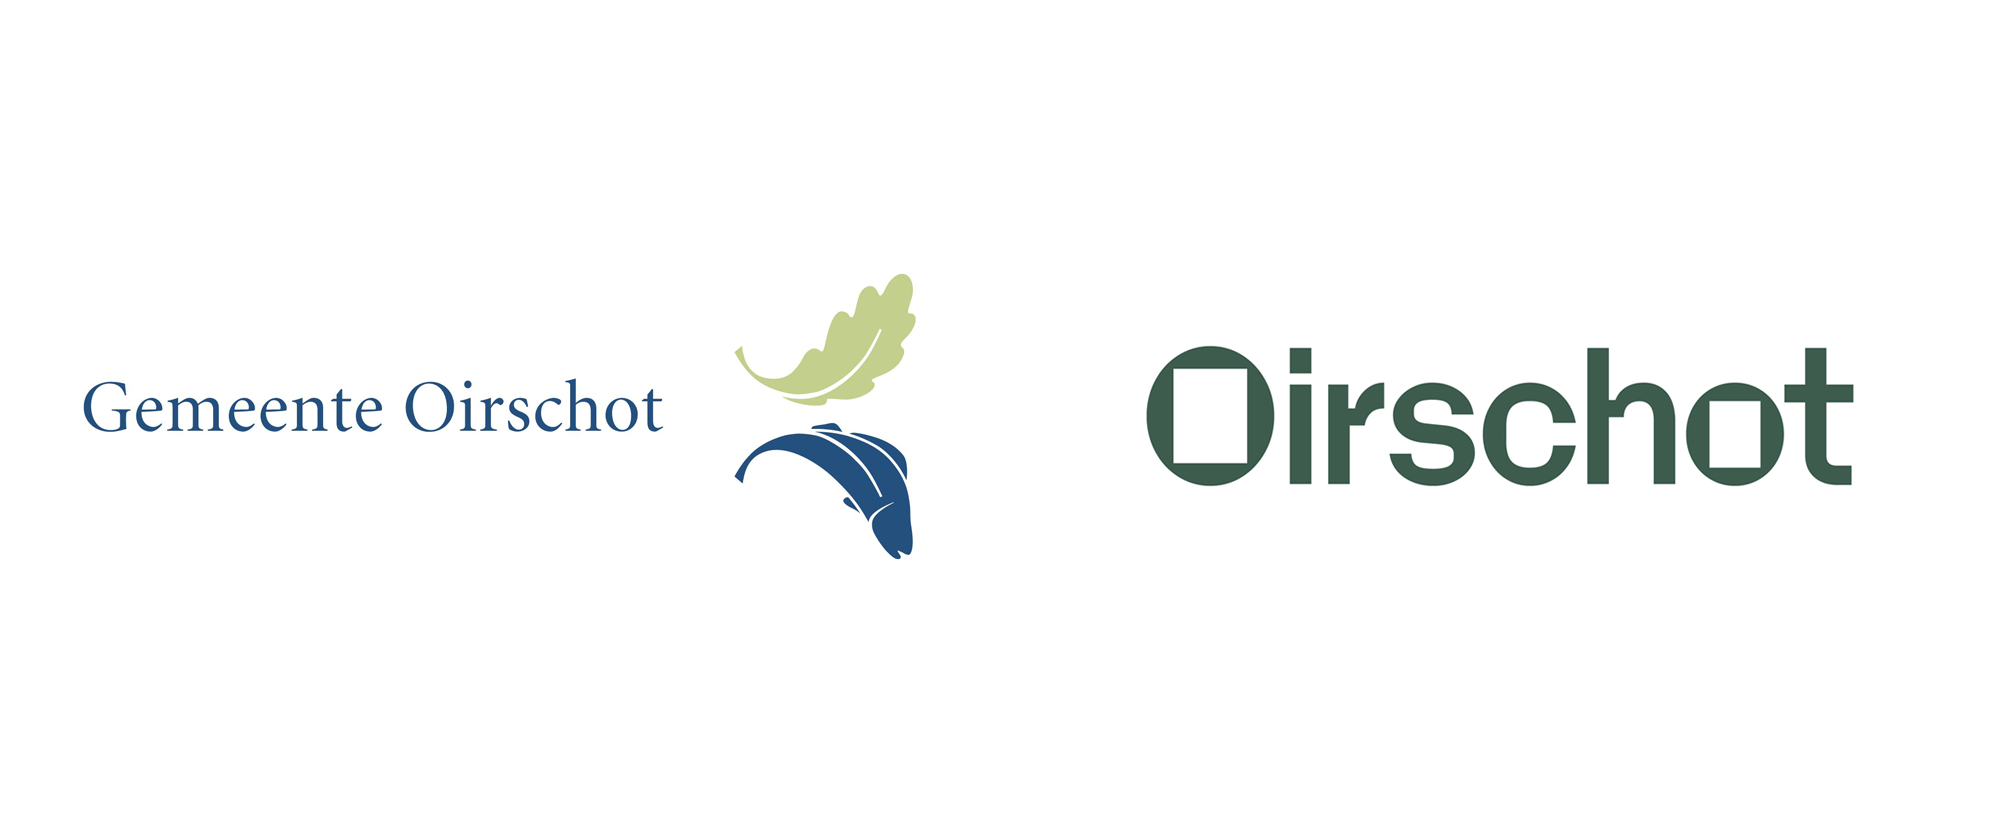 New Logo and Identity for Oirschot by George&Harrison